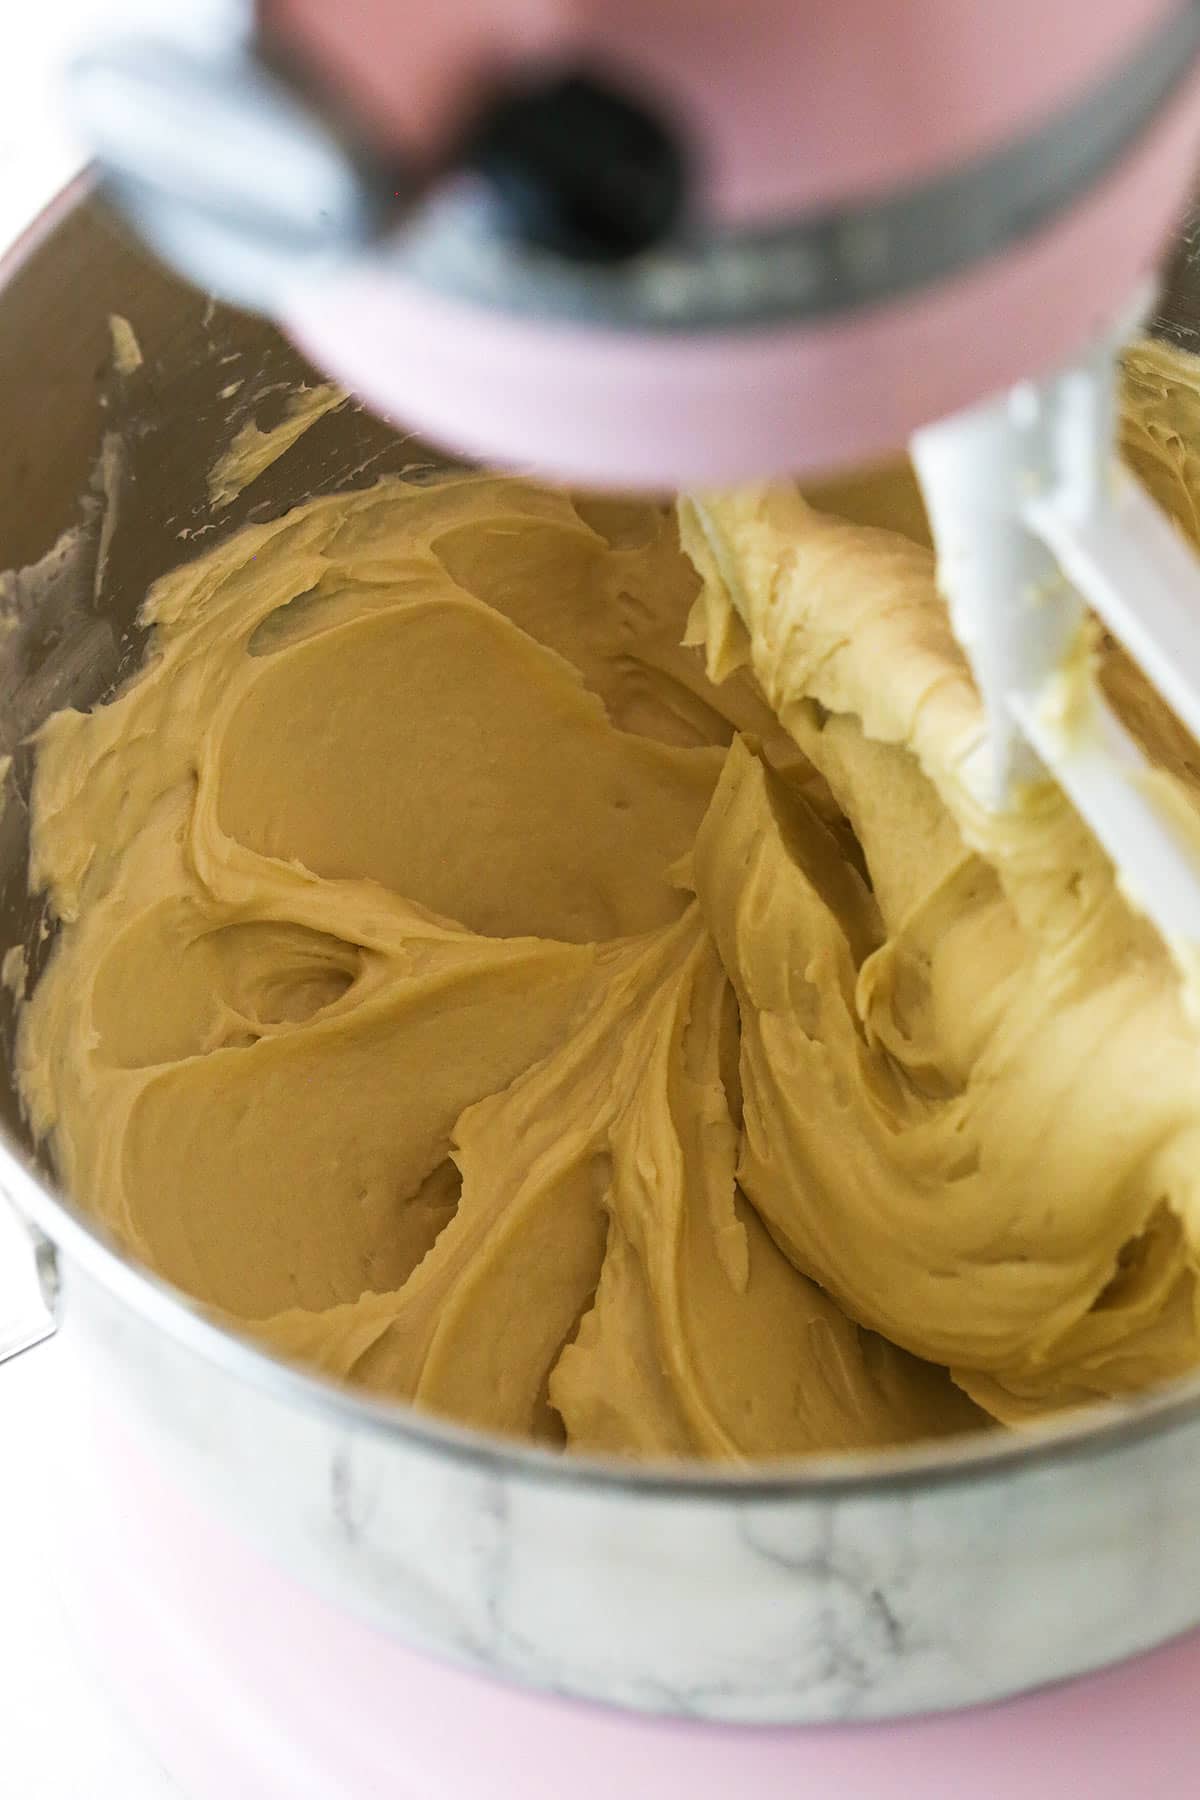 The combined cream cheese, sugar and flour in a big electric mixer bowl